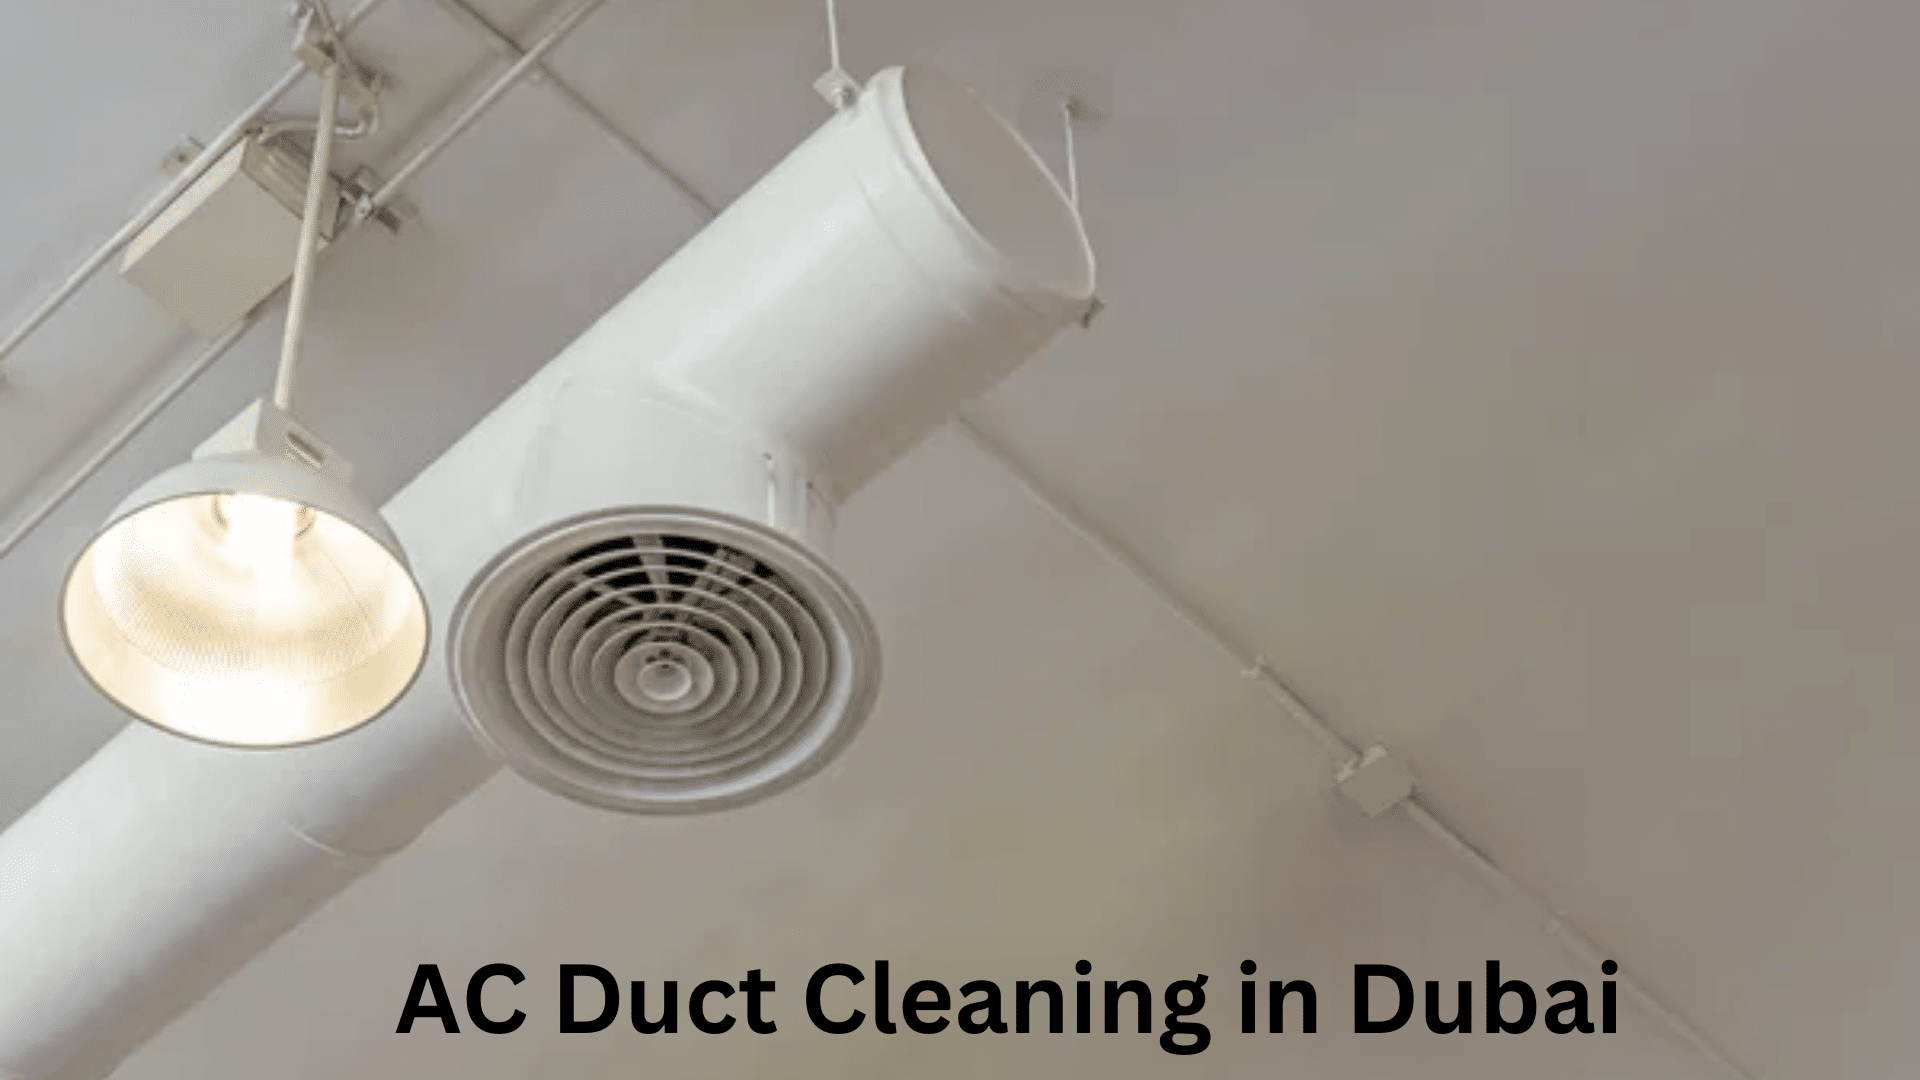 Ac Duct Cleaning